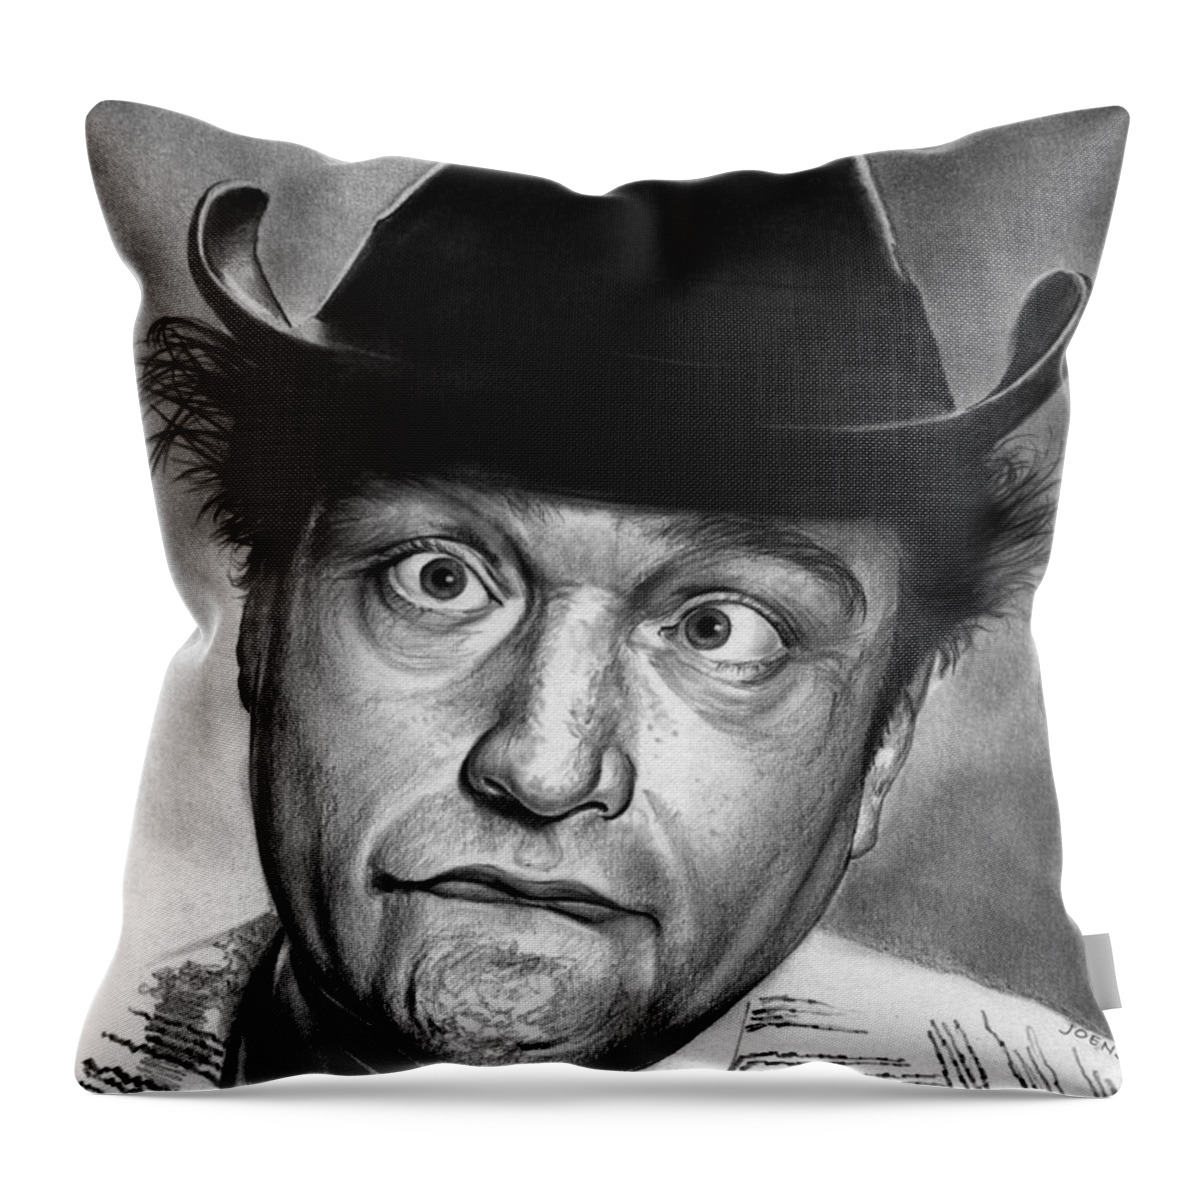 Celebrity Throw Pillow featuring the drawing Red Skelton by Greg Joens